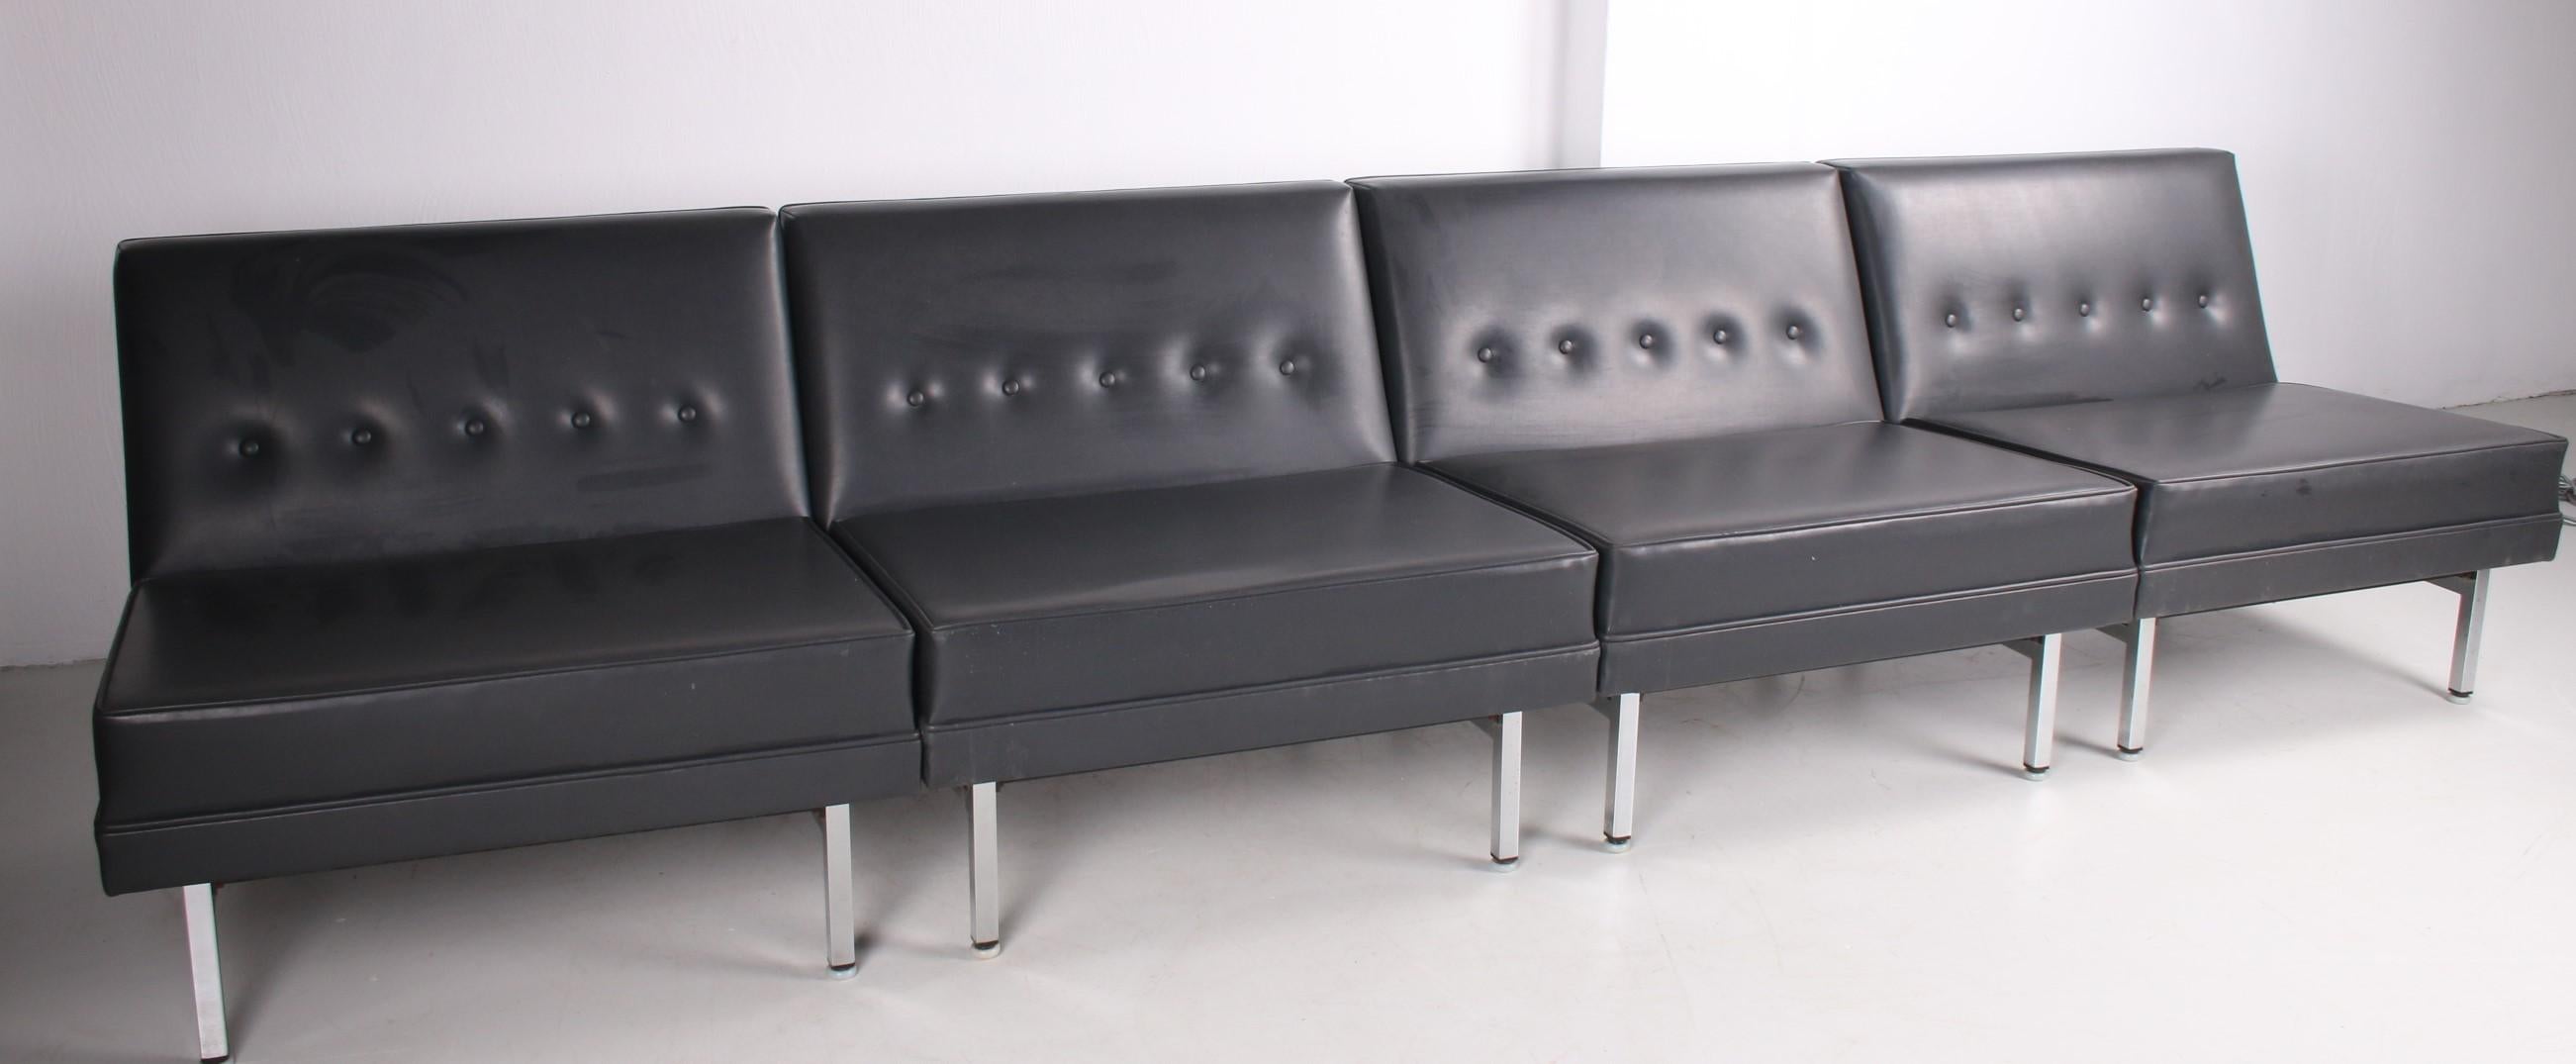 Designed by George Nelson, this living room set is an iconic piece of Mid-Century Modern design! Manufactured by Herman Miller in the United States of America, circa 1960.

The set contains 4 separate seating elements covered with black imitation